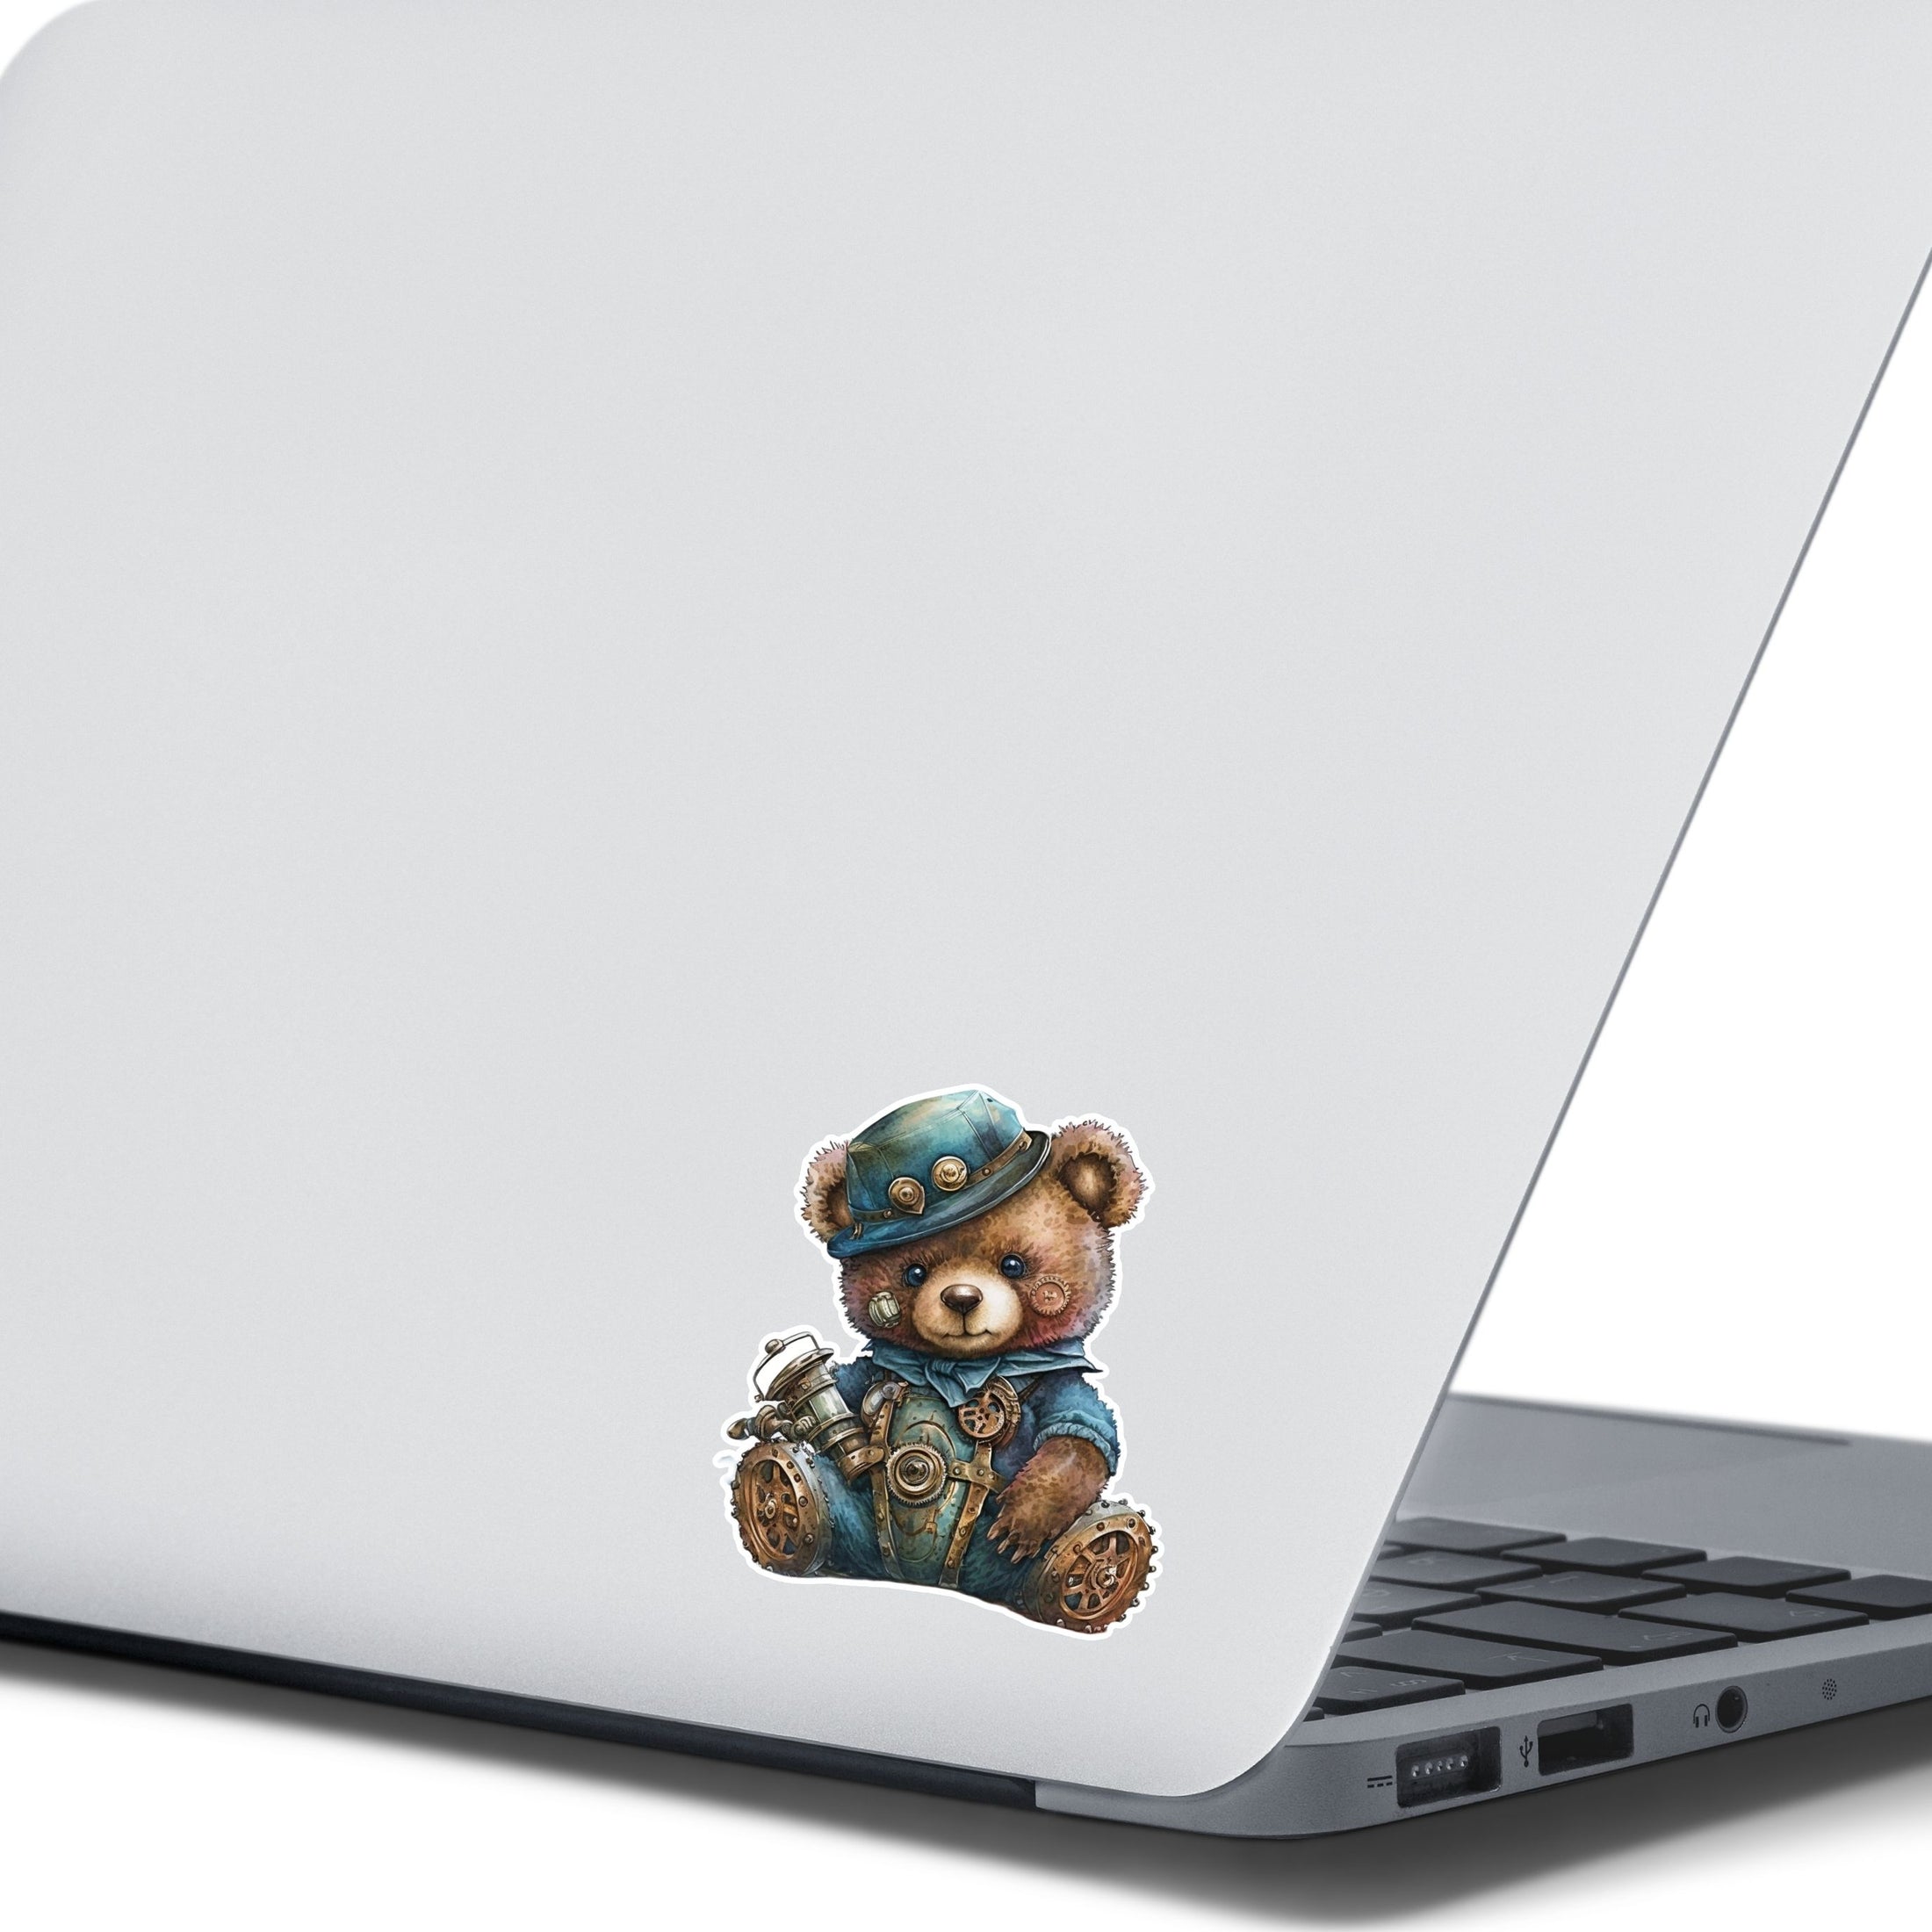 This image shows the steampunk teddy sticker on the back of an open laptop.